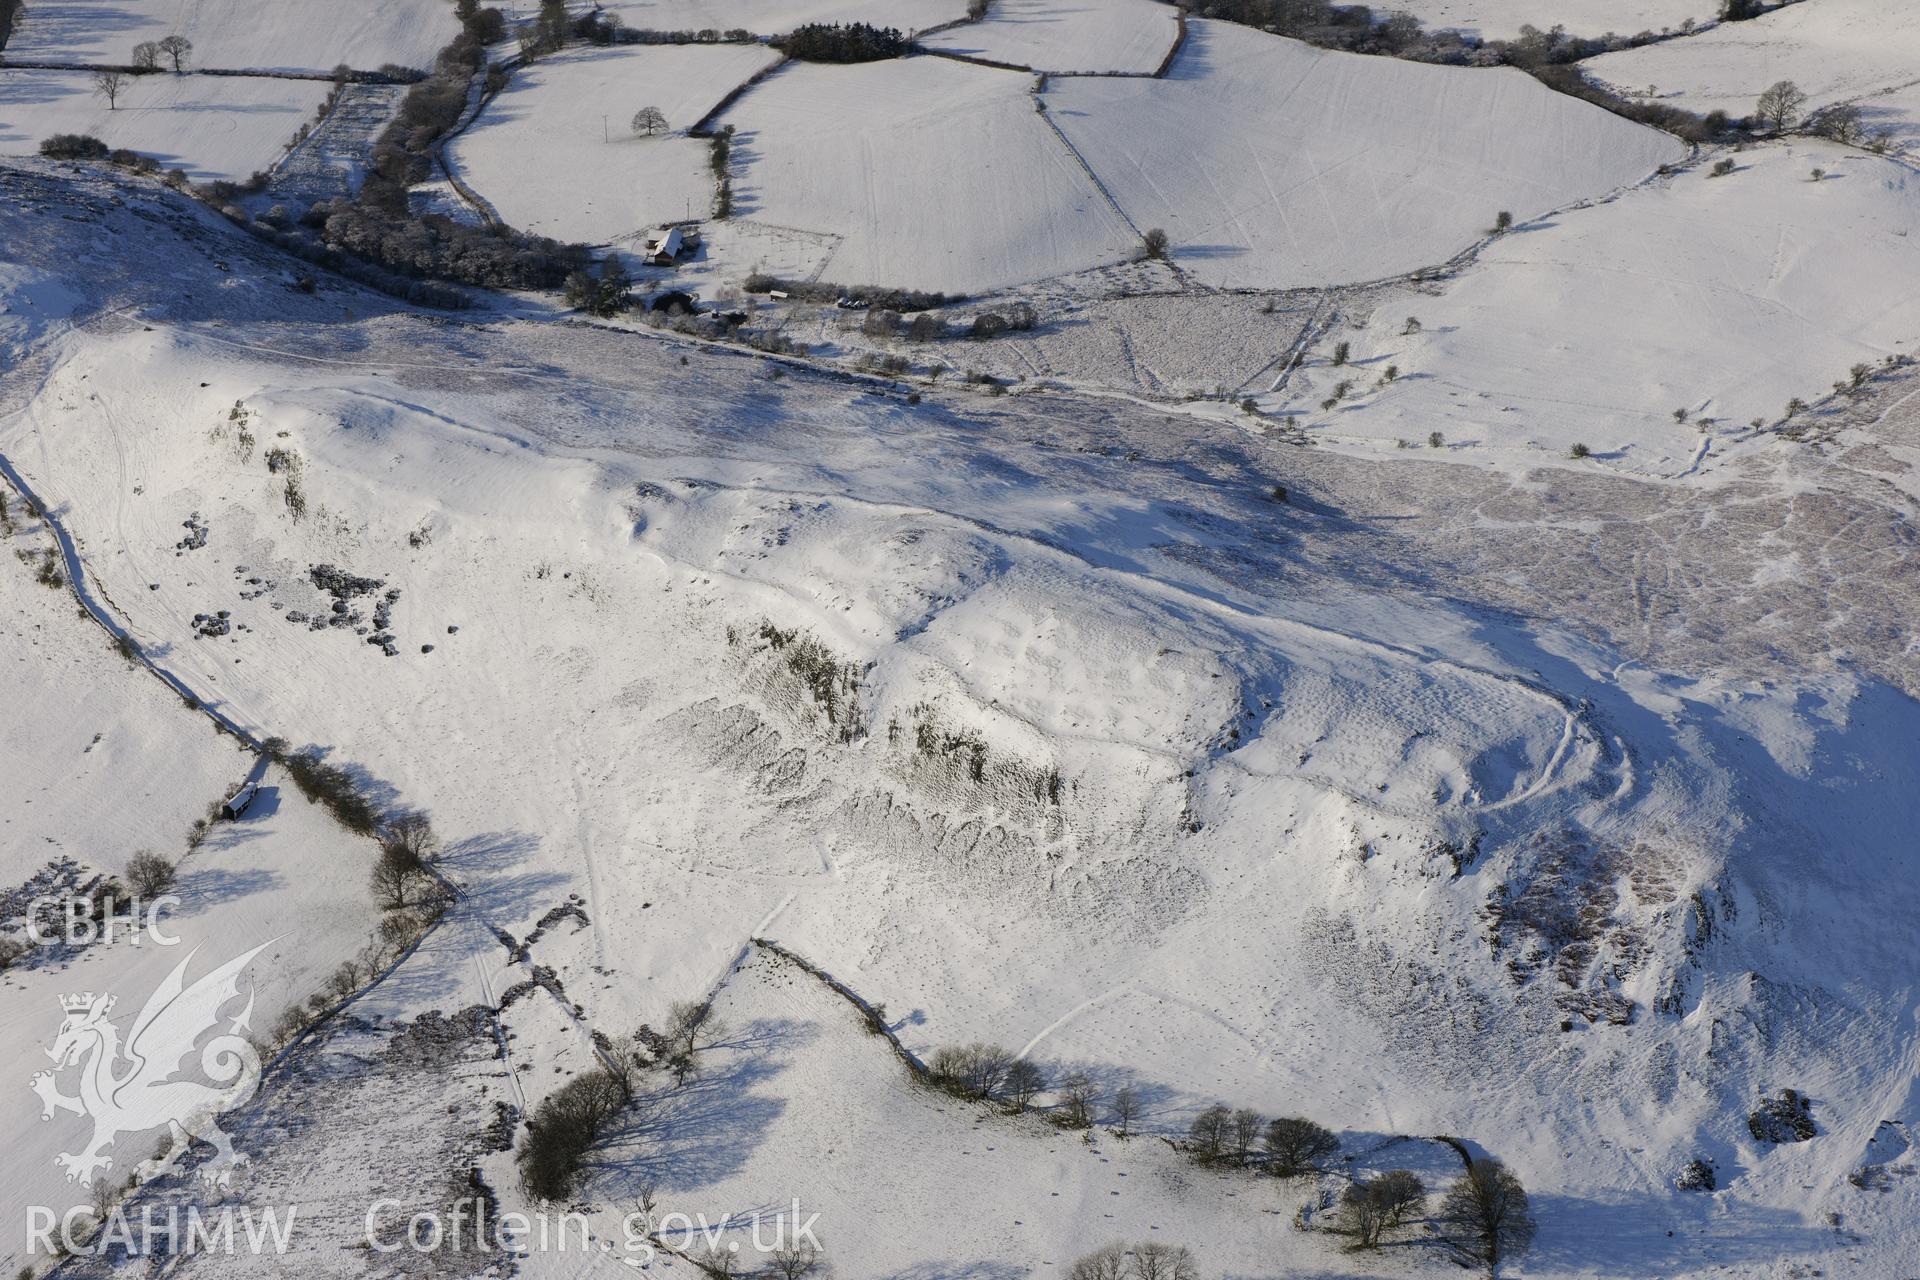 Castle Bank hillfort under snow, north east of Builth Wells. Oblique aerial photograph taken during the Royal Commission?s programme of archaeological aerial reconnaissance by Toby Driver on 15th January 2013.